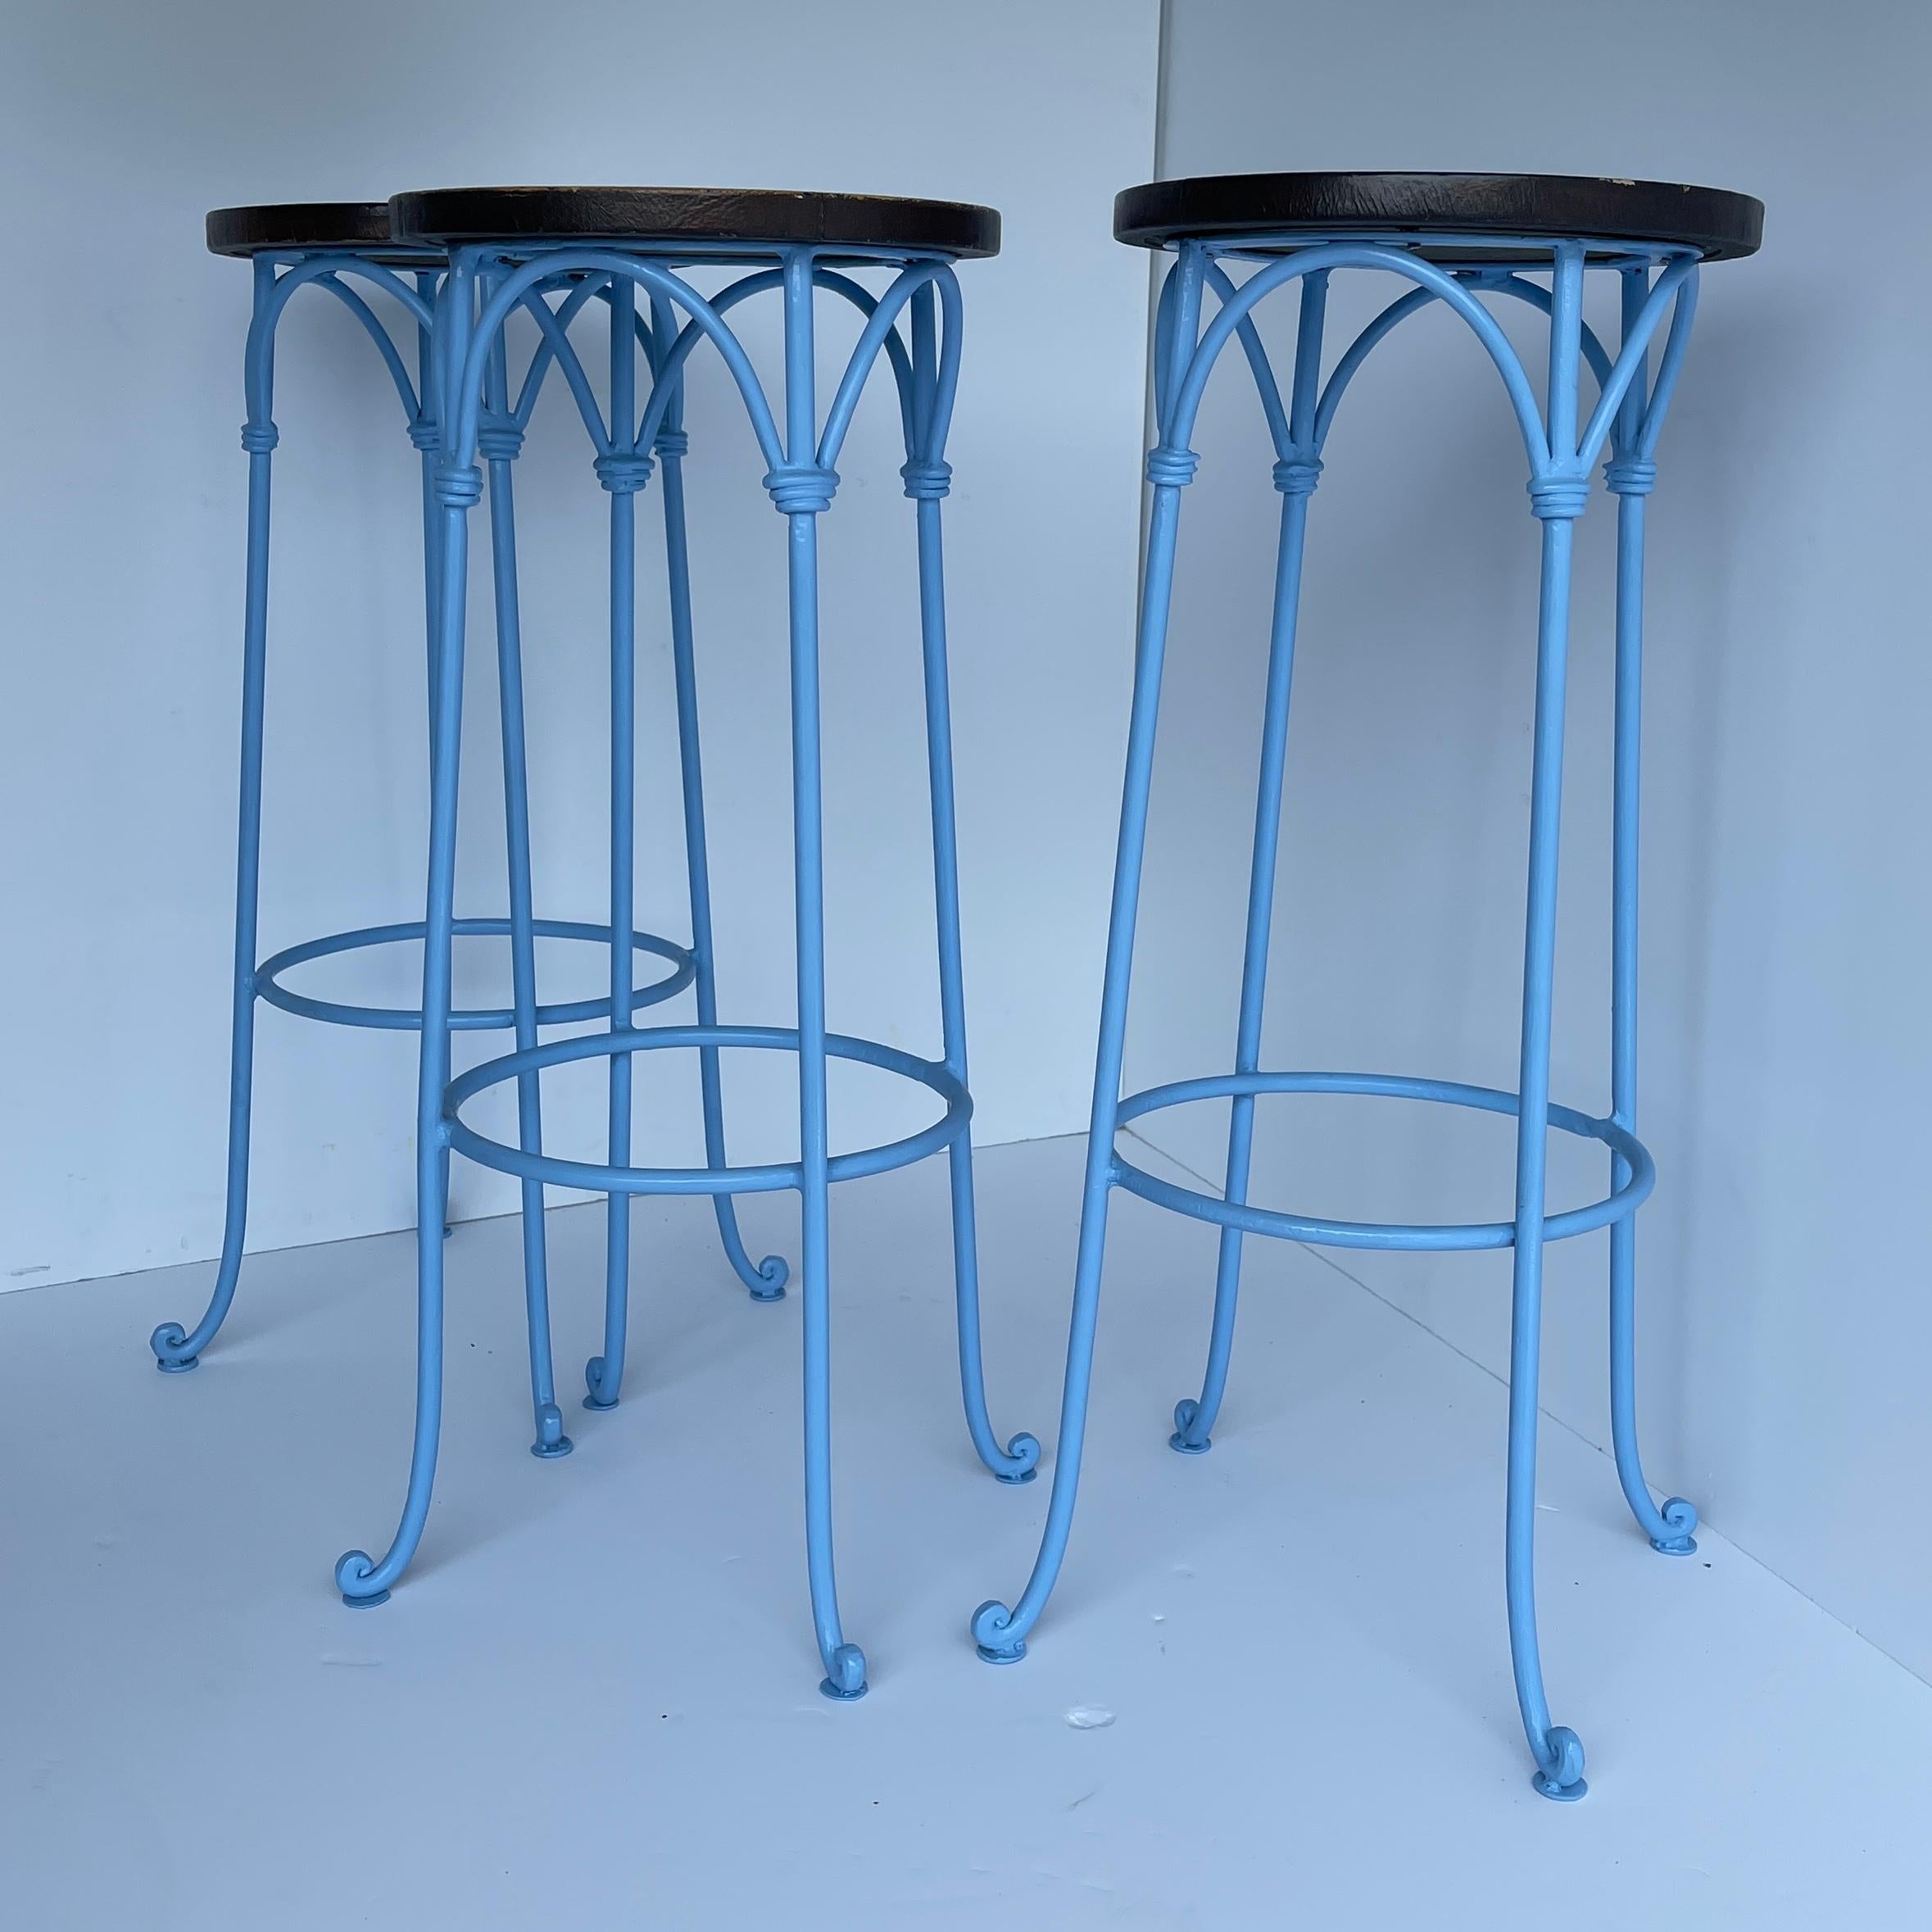 American Three Blue Barstools with Leather Seats, Legs Powder Coated For Sale